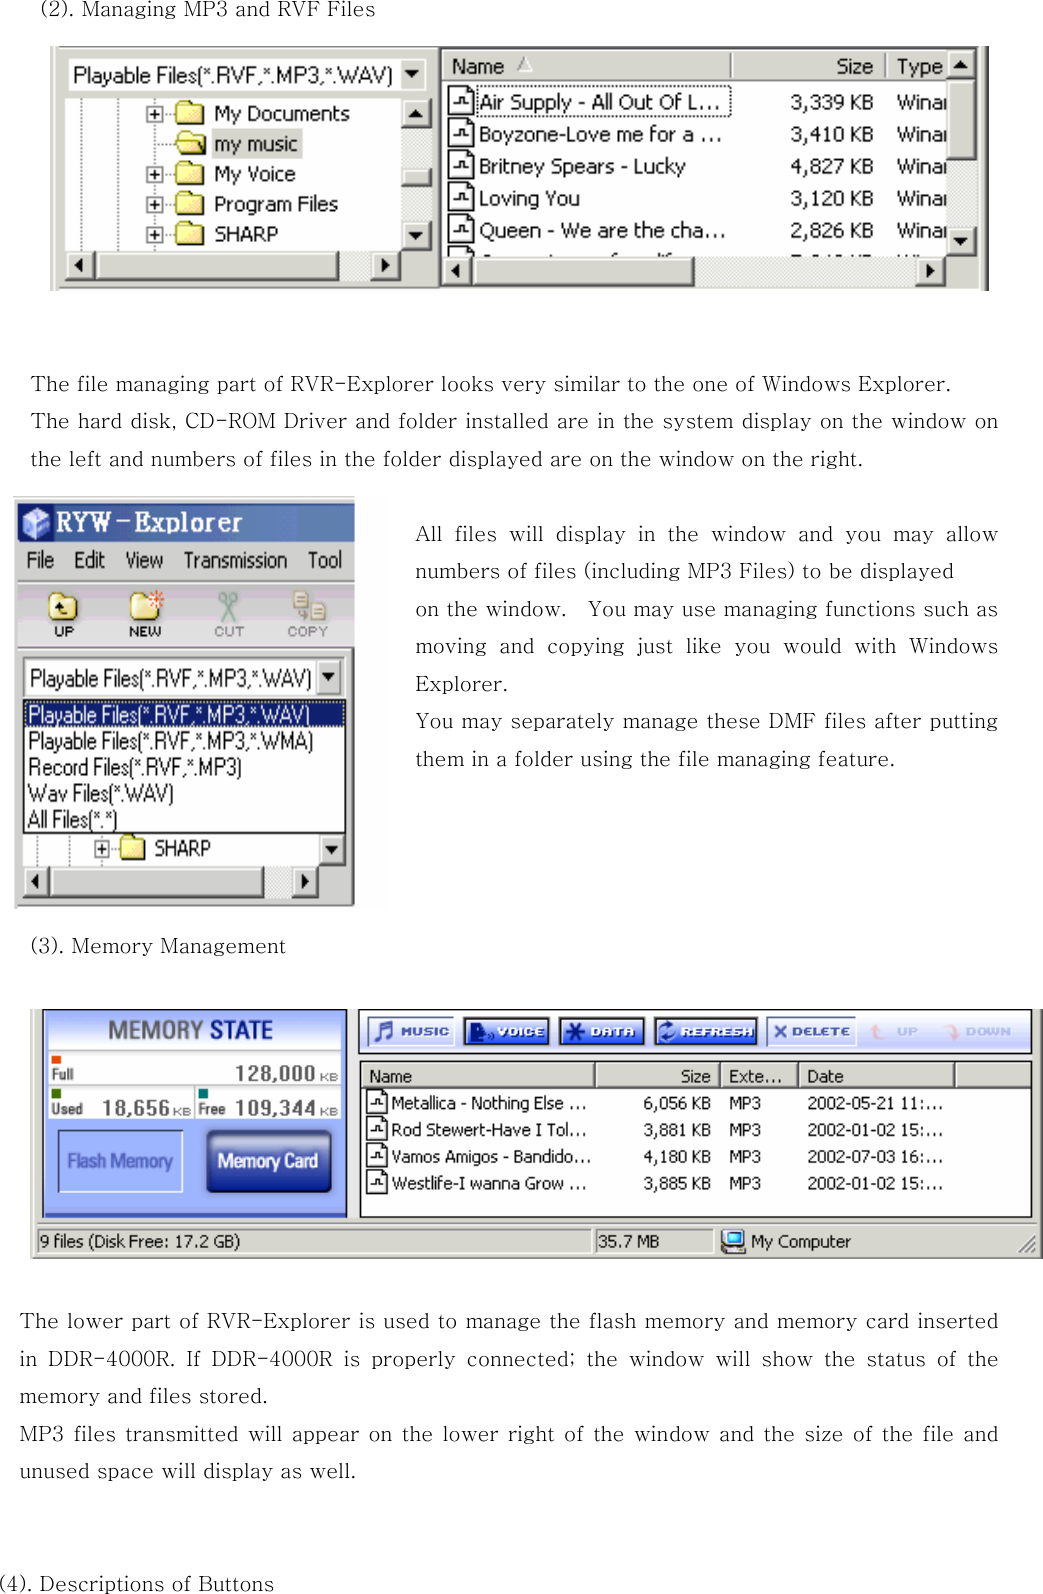 (2). Managing MP3 and RVF Files              The file managing part of RVR-Explorer looks very similar to the one of Windows Explorer.   The hard disk, CD-ROM Driver and folder installed are in the system display on the window on the left and numbers of files in the folder displayed are on the window on the right.      All files will display in the window and you may allow numbers of files (including MP3 Files) to be displayed               on the window.    You may use managing functions such as moving and copying just like you would with Windows Explorer.   You may separately manage these DMF files after putting them in a folder using the file managing feature.     (3). Memory Management      The lower part of RVR-Explorer is used to manage the flash memory and memory card inserted in  DDR-4000R.  If  DDR-4000R  is  properly  connected;  the  window  will  show  the  status  of  the memory and files stored. MP3 files transmitted will  appear  on the lower right of the window and  the size  of  the  file and unused space will display as well.   (4). Descriptions of Buttons 